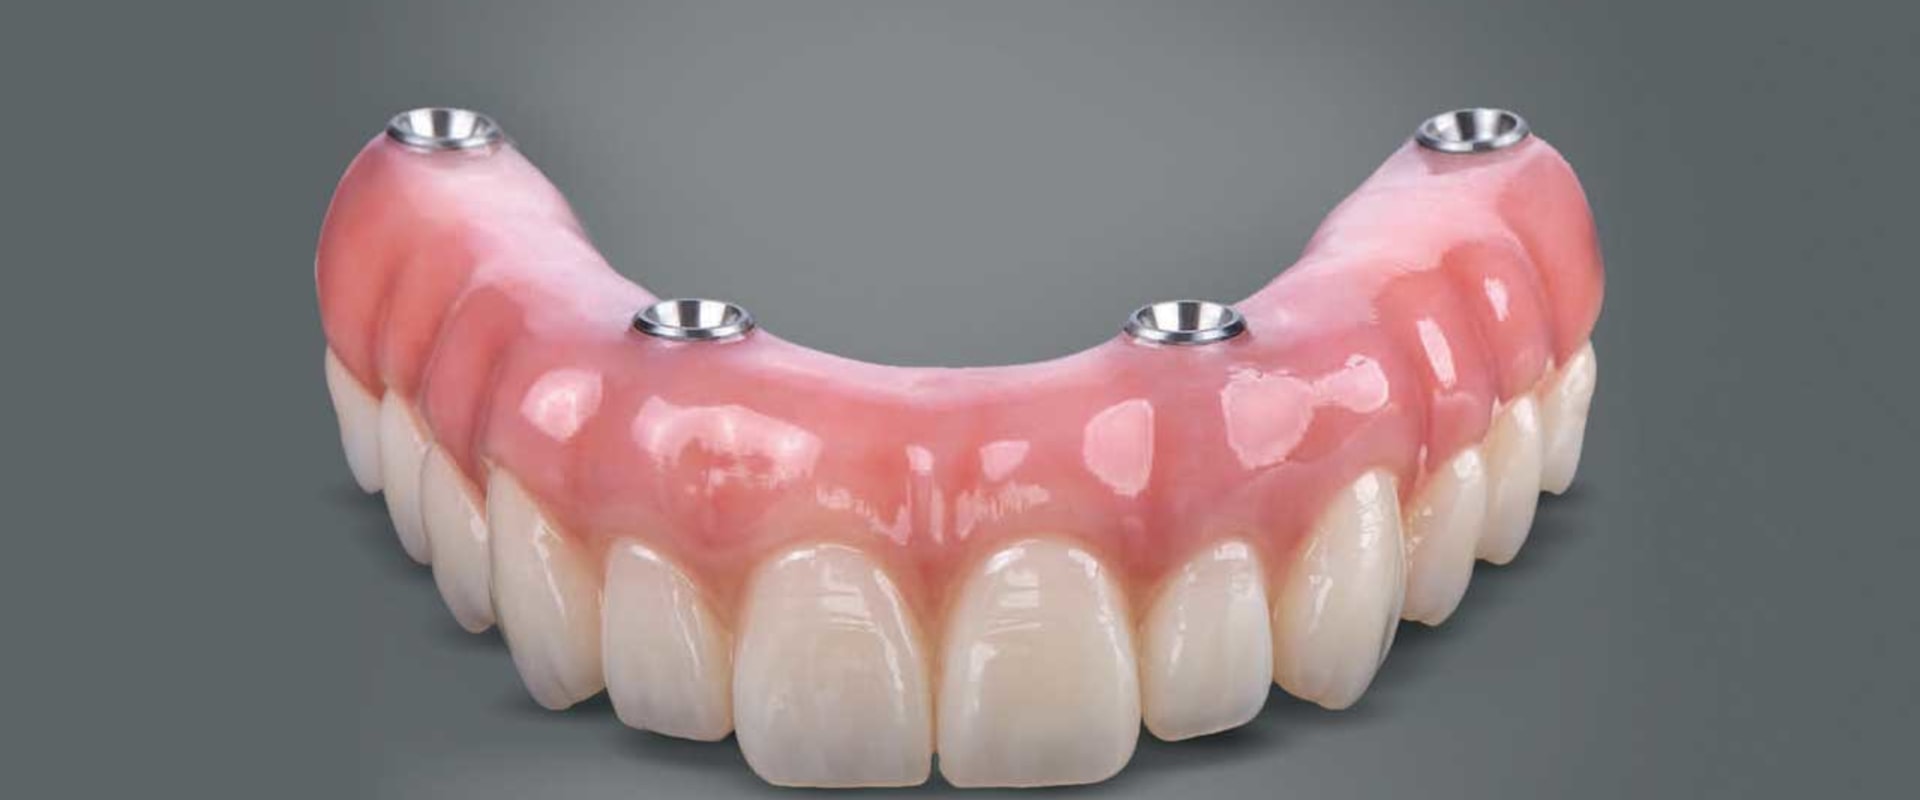 What Materials are Used for All-on-4 Dental Implants?